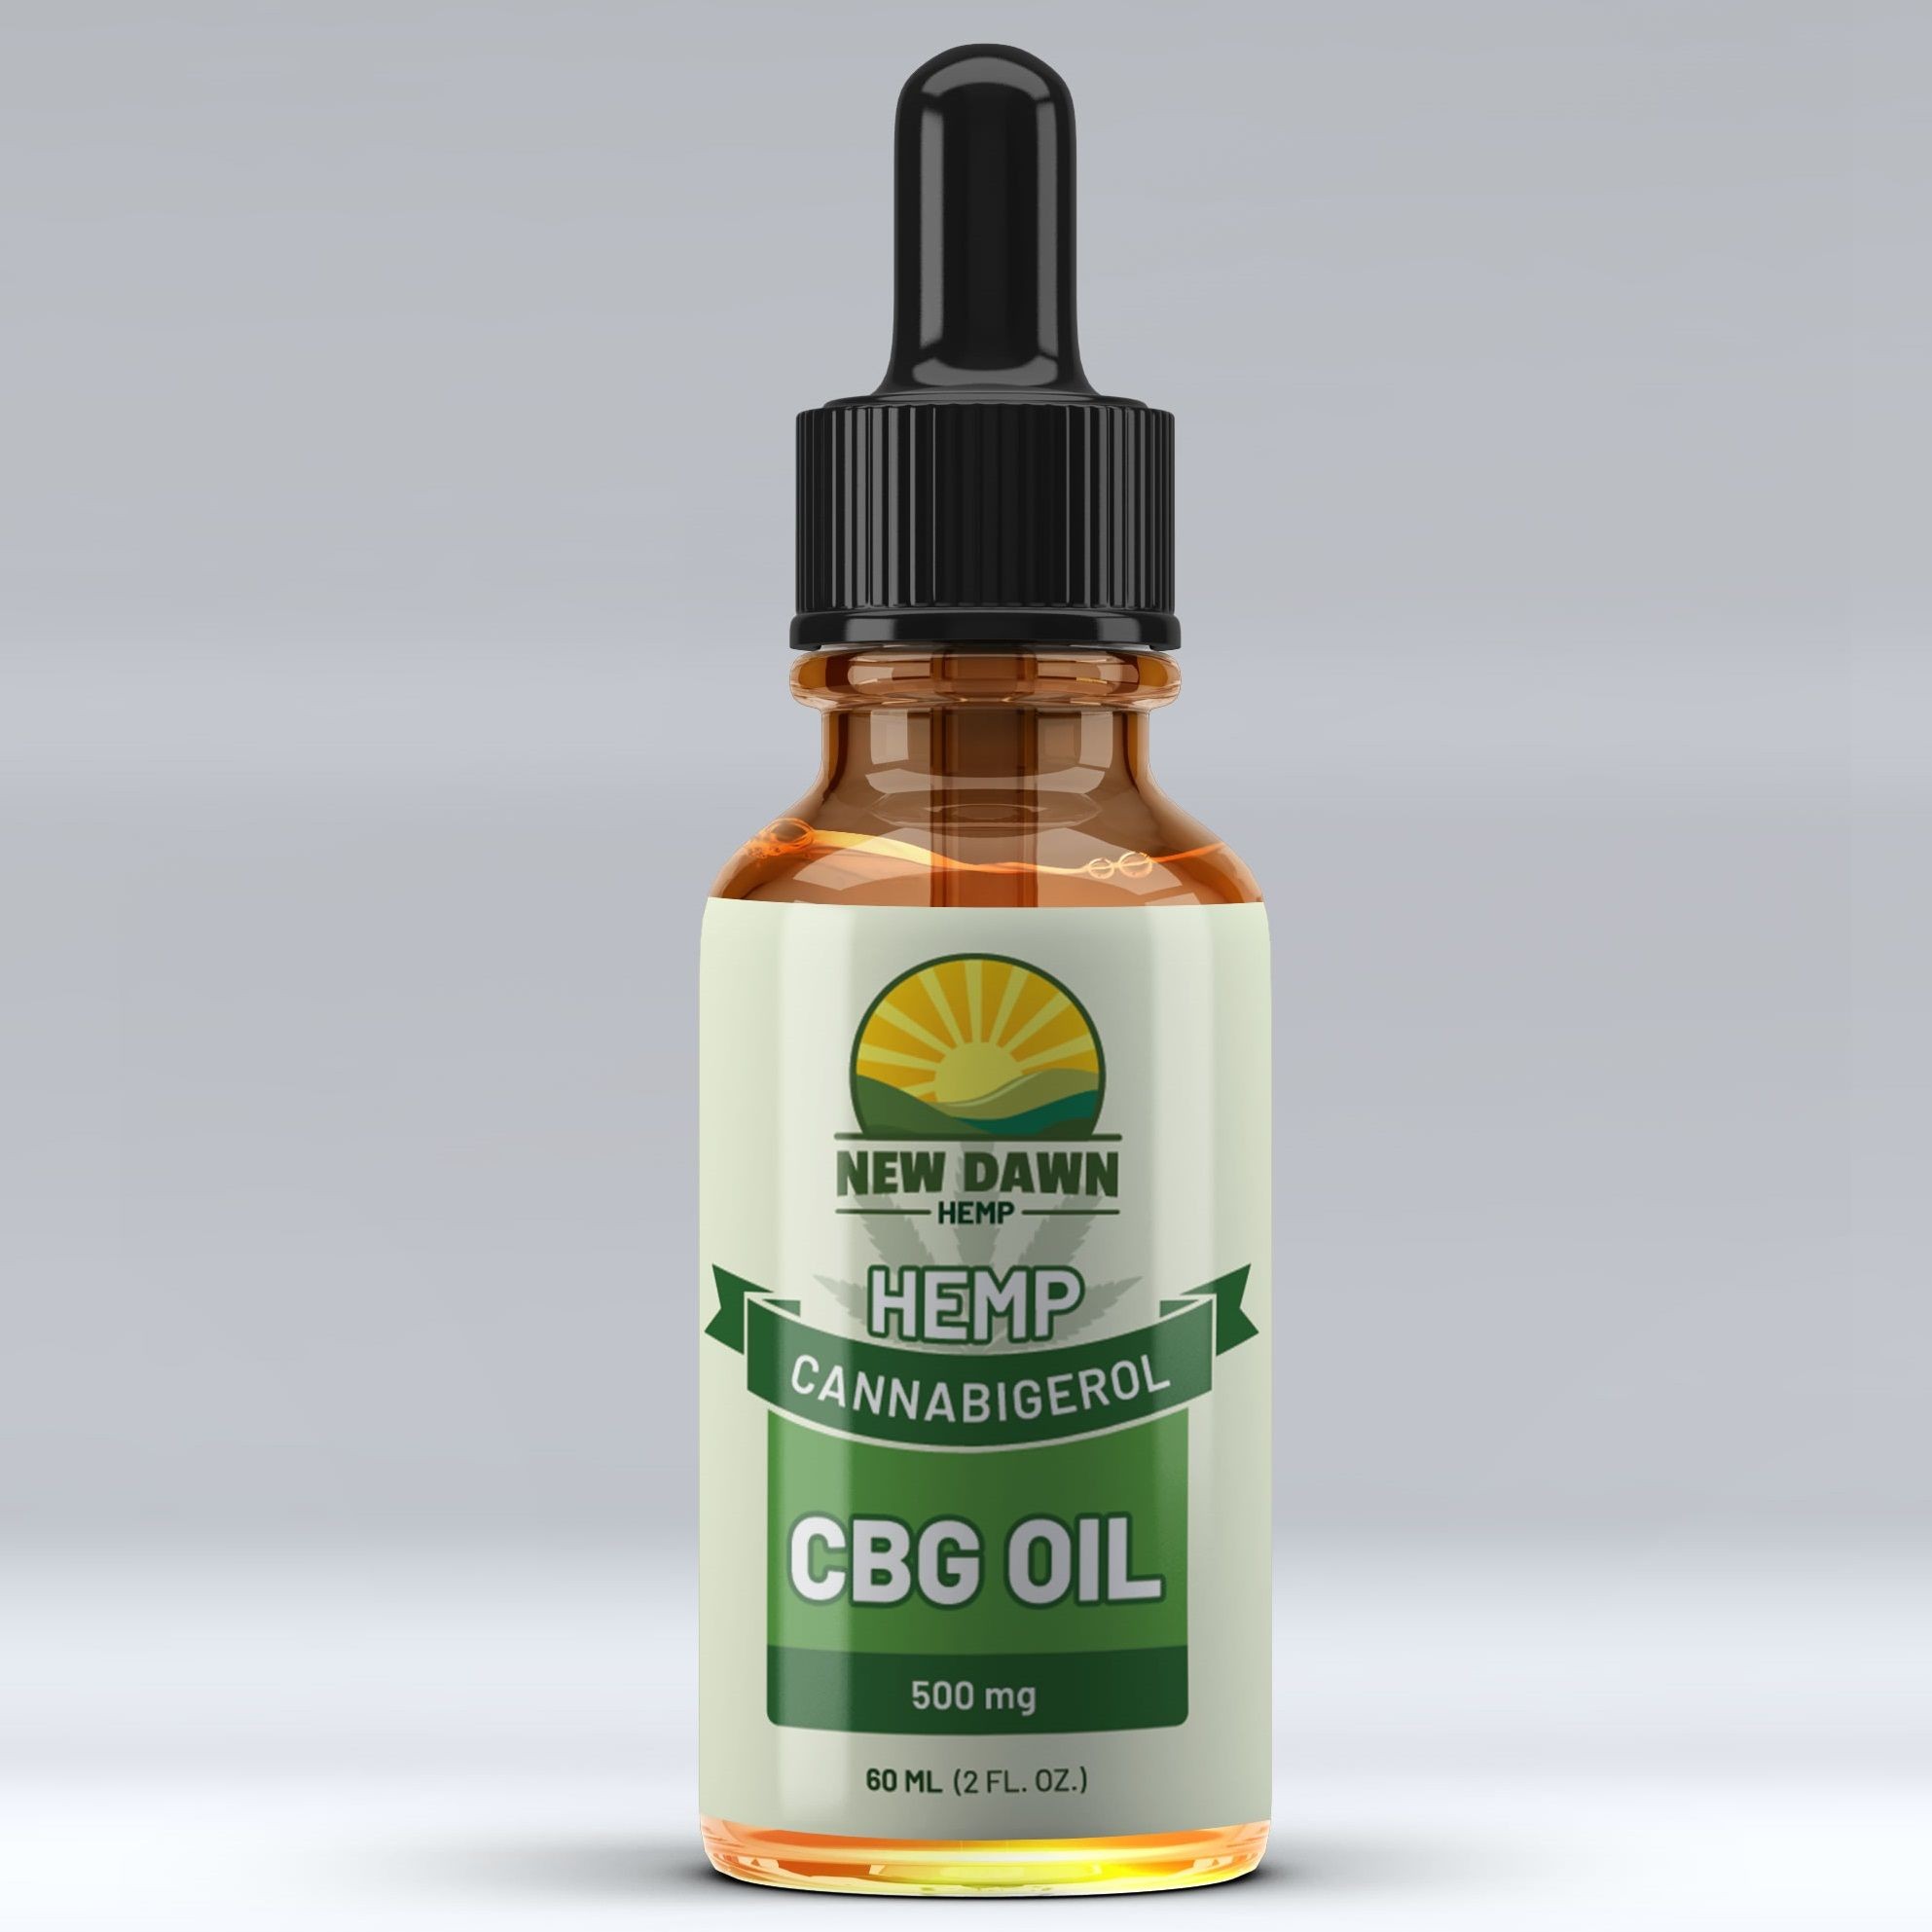 Cbg Products For Sale - Cbg|Gummies|Cbd|Effects|Thc|Cannabinoid|Hemp|Cannabinoids|Image|Products|Courtesy|Product|Way|Benefits|Dosage|Everyone|Oil|People|Spectrum|Others|Gummy|Time|Dosages|Advantages|Cannabis|Results|Treatment|Body|Stomach|Tincture|Pain|Drug|Approach|Isolate|Side|Dog|Ingredients|List|State|Cannabigerol|Cbg Gummies|Psychoactive Effects|Full Spectrum Gummies|Image Courtesy|Full-Spectrum Cbd Products|Different Dosages|Right Dosage|Empty Stomach|Cbd Gummies|Cbd Isolate|Side Effects|Different Effects|Dog Cbg Gummies|Drug Test|Full-Spectrum Cbd Product|Few Things|Chronic Pain|Full-Spectrum Cbd|Psychotropic Effects|Final Thoughts|Right Dosage Everyone|Final Tips|Same Results|Cbg Ratio|Appetite Loss|Powerful Hunger Stimulant|Whereas Cbd|Thc Ratio Gummies|Dangerous Consequence|Numerous Diseases